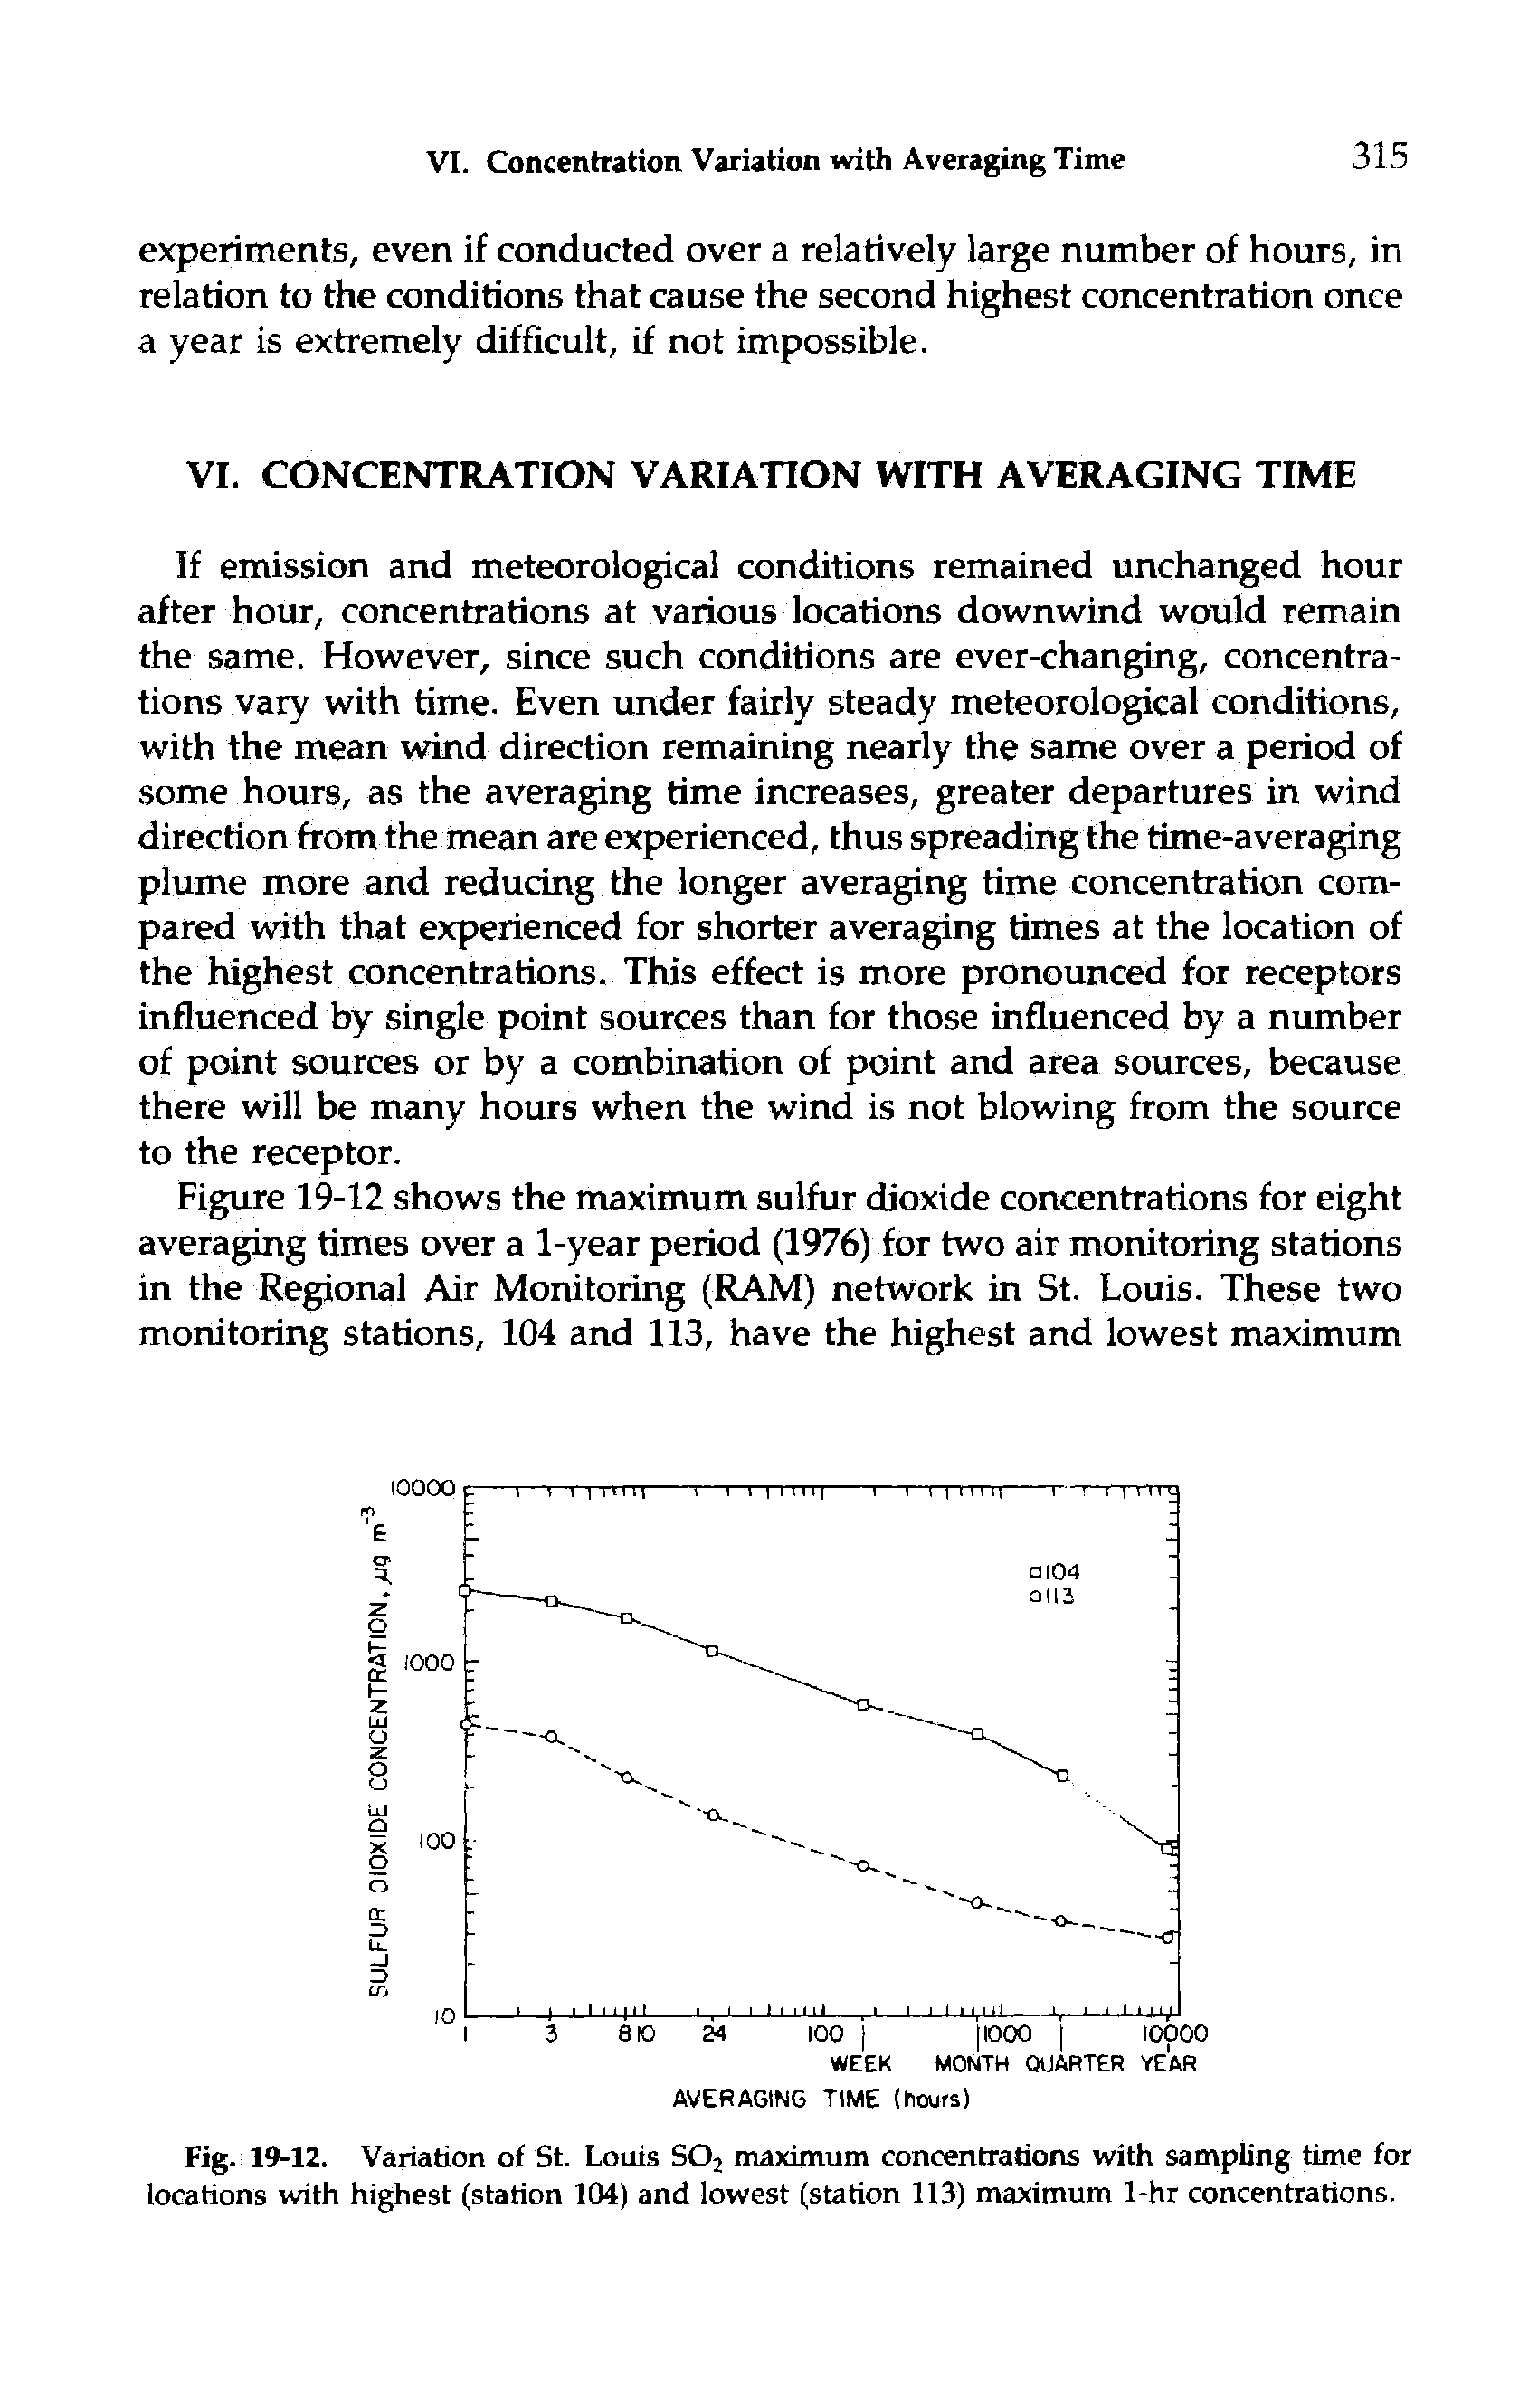 Fig. 19-12. Variation of St. Louis SOj maximum concentrations with sampling time for locations with highest (station 104) and lowest (station 113) maximum 1-hr concentrations.